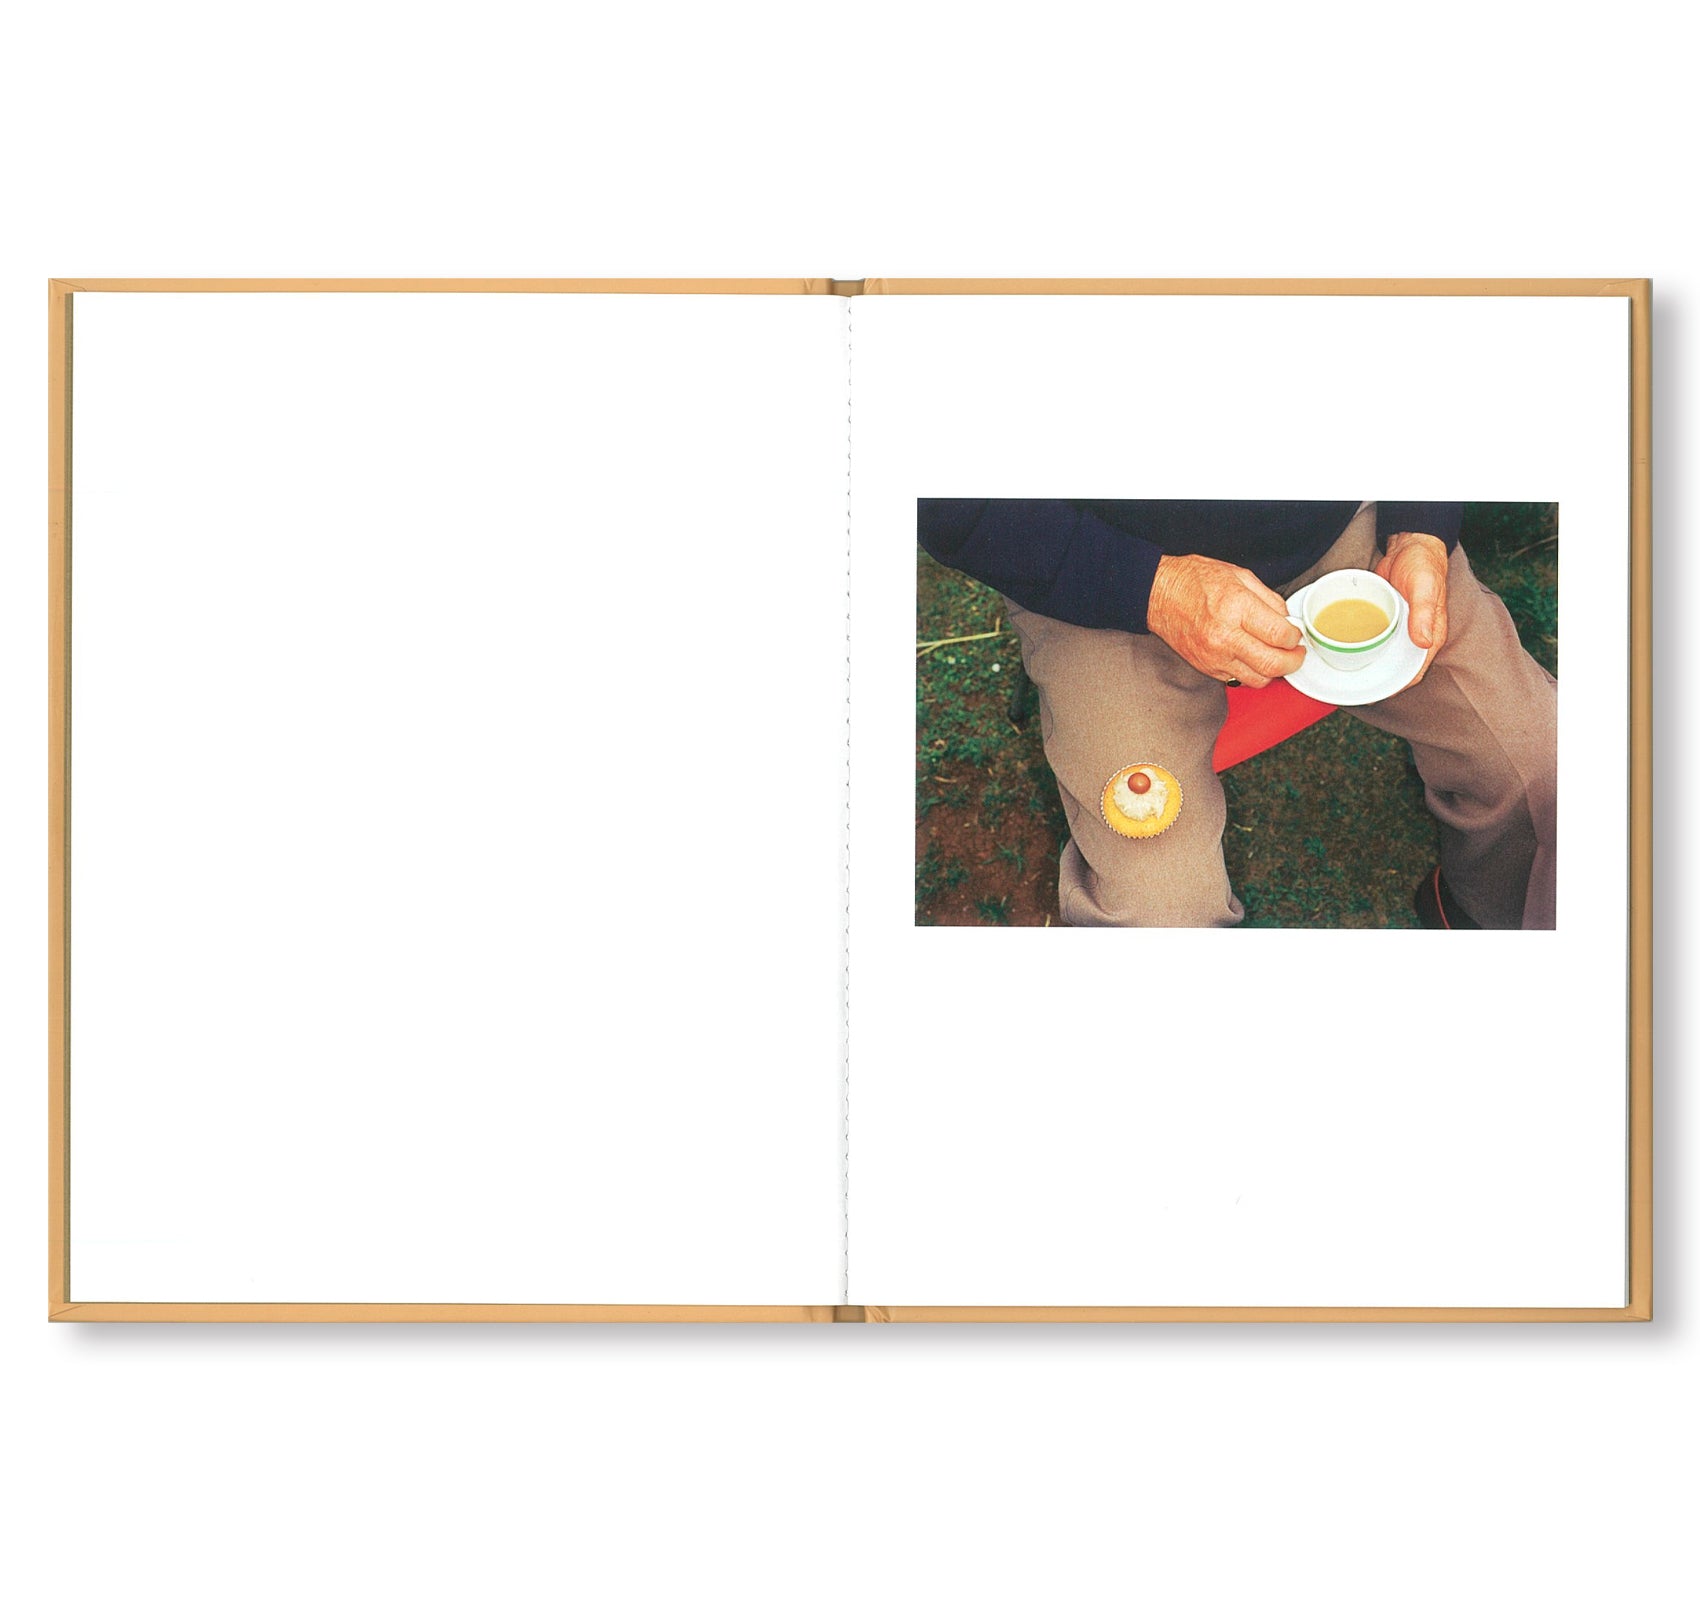 ONE PICTURE BOOK #74: 7 CUPS OF TEA by Martin Parr